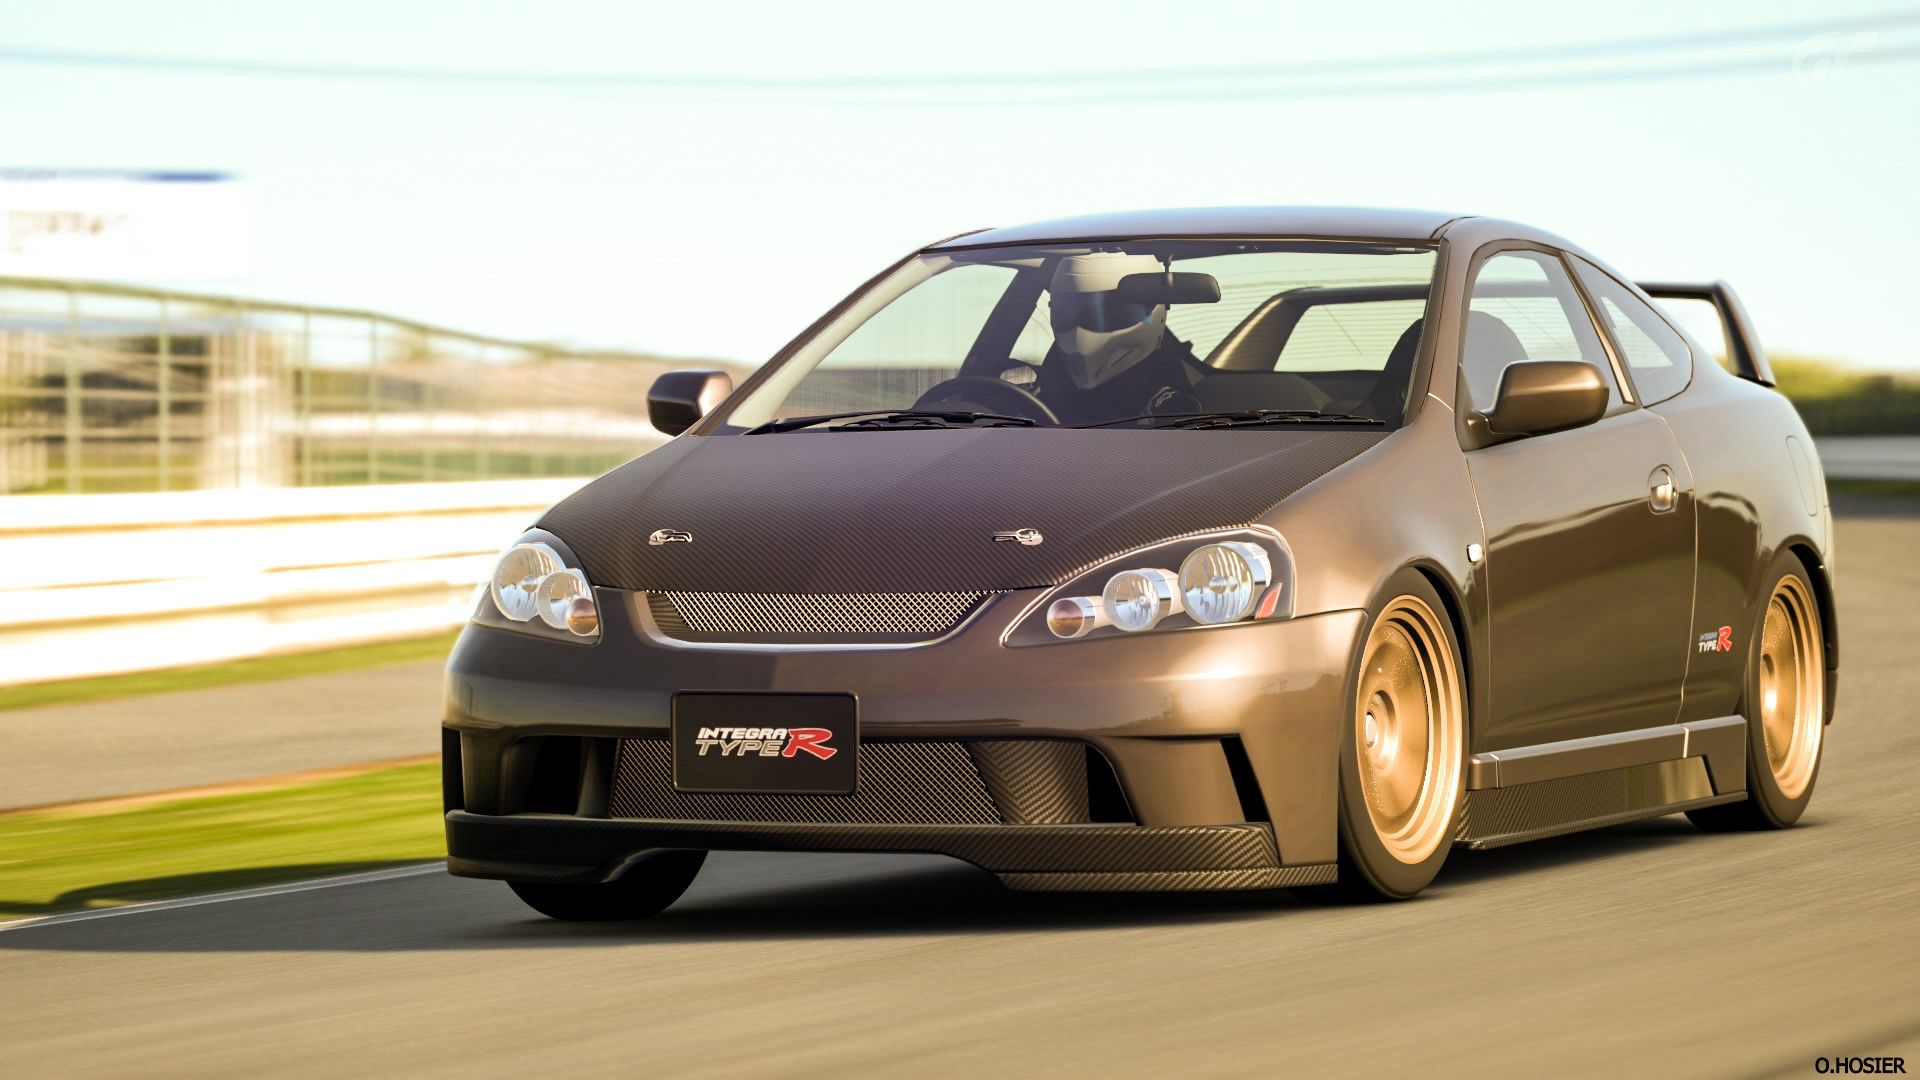 Hey any acura rsx type s wallpaper or 4th Gen mitubishi eclipse gt wallpaper thanks